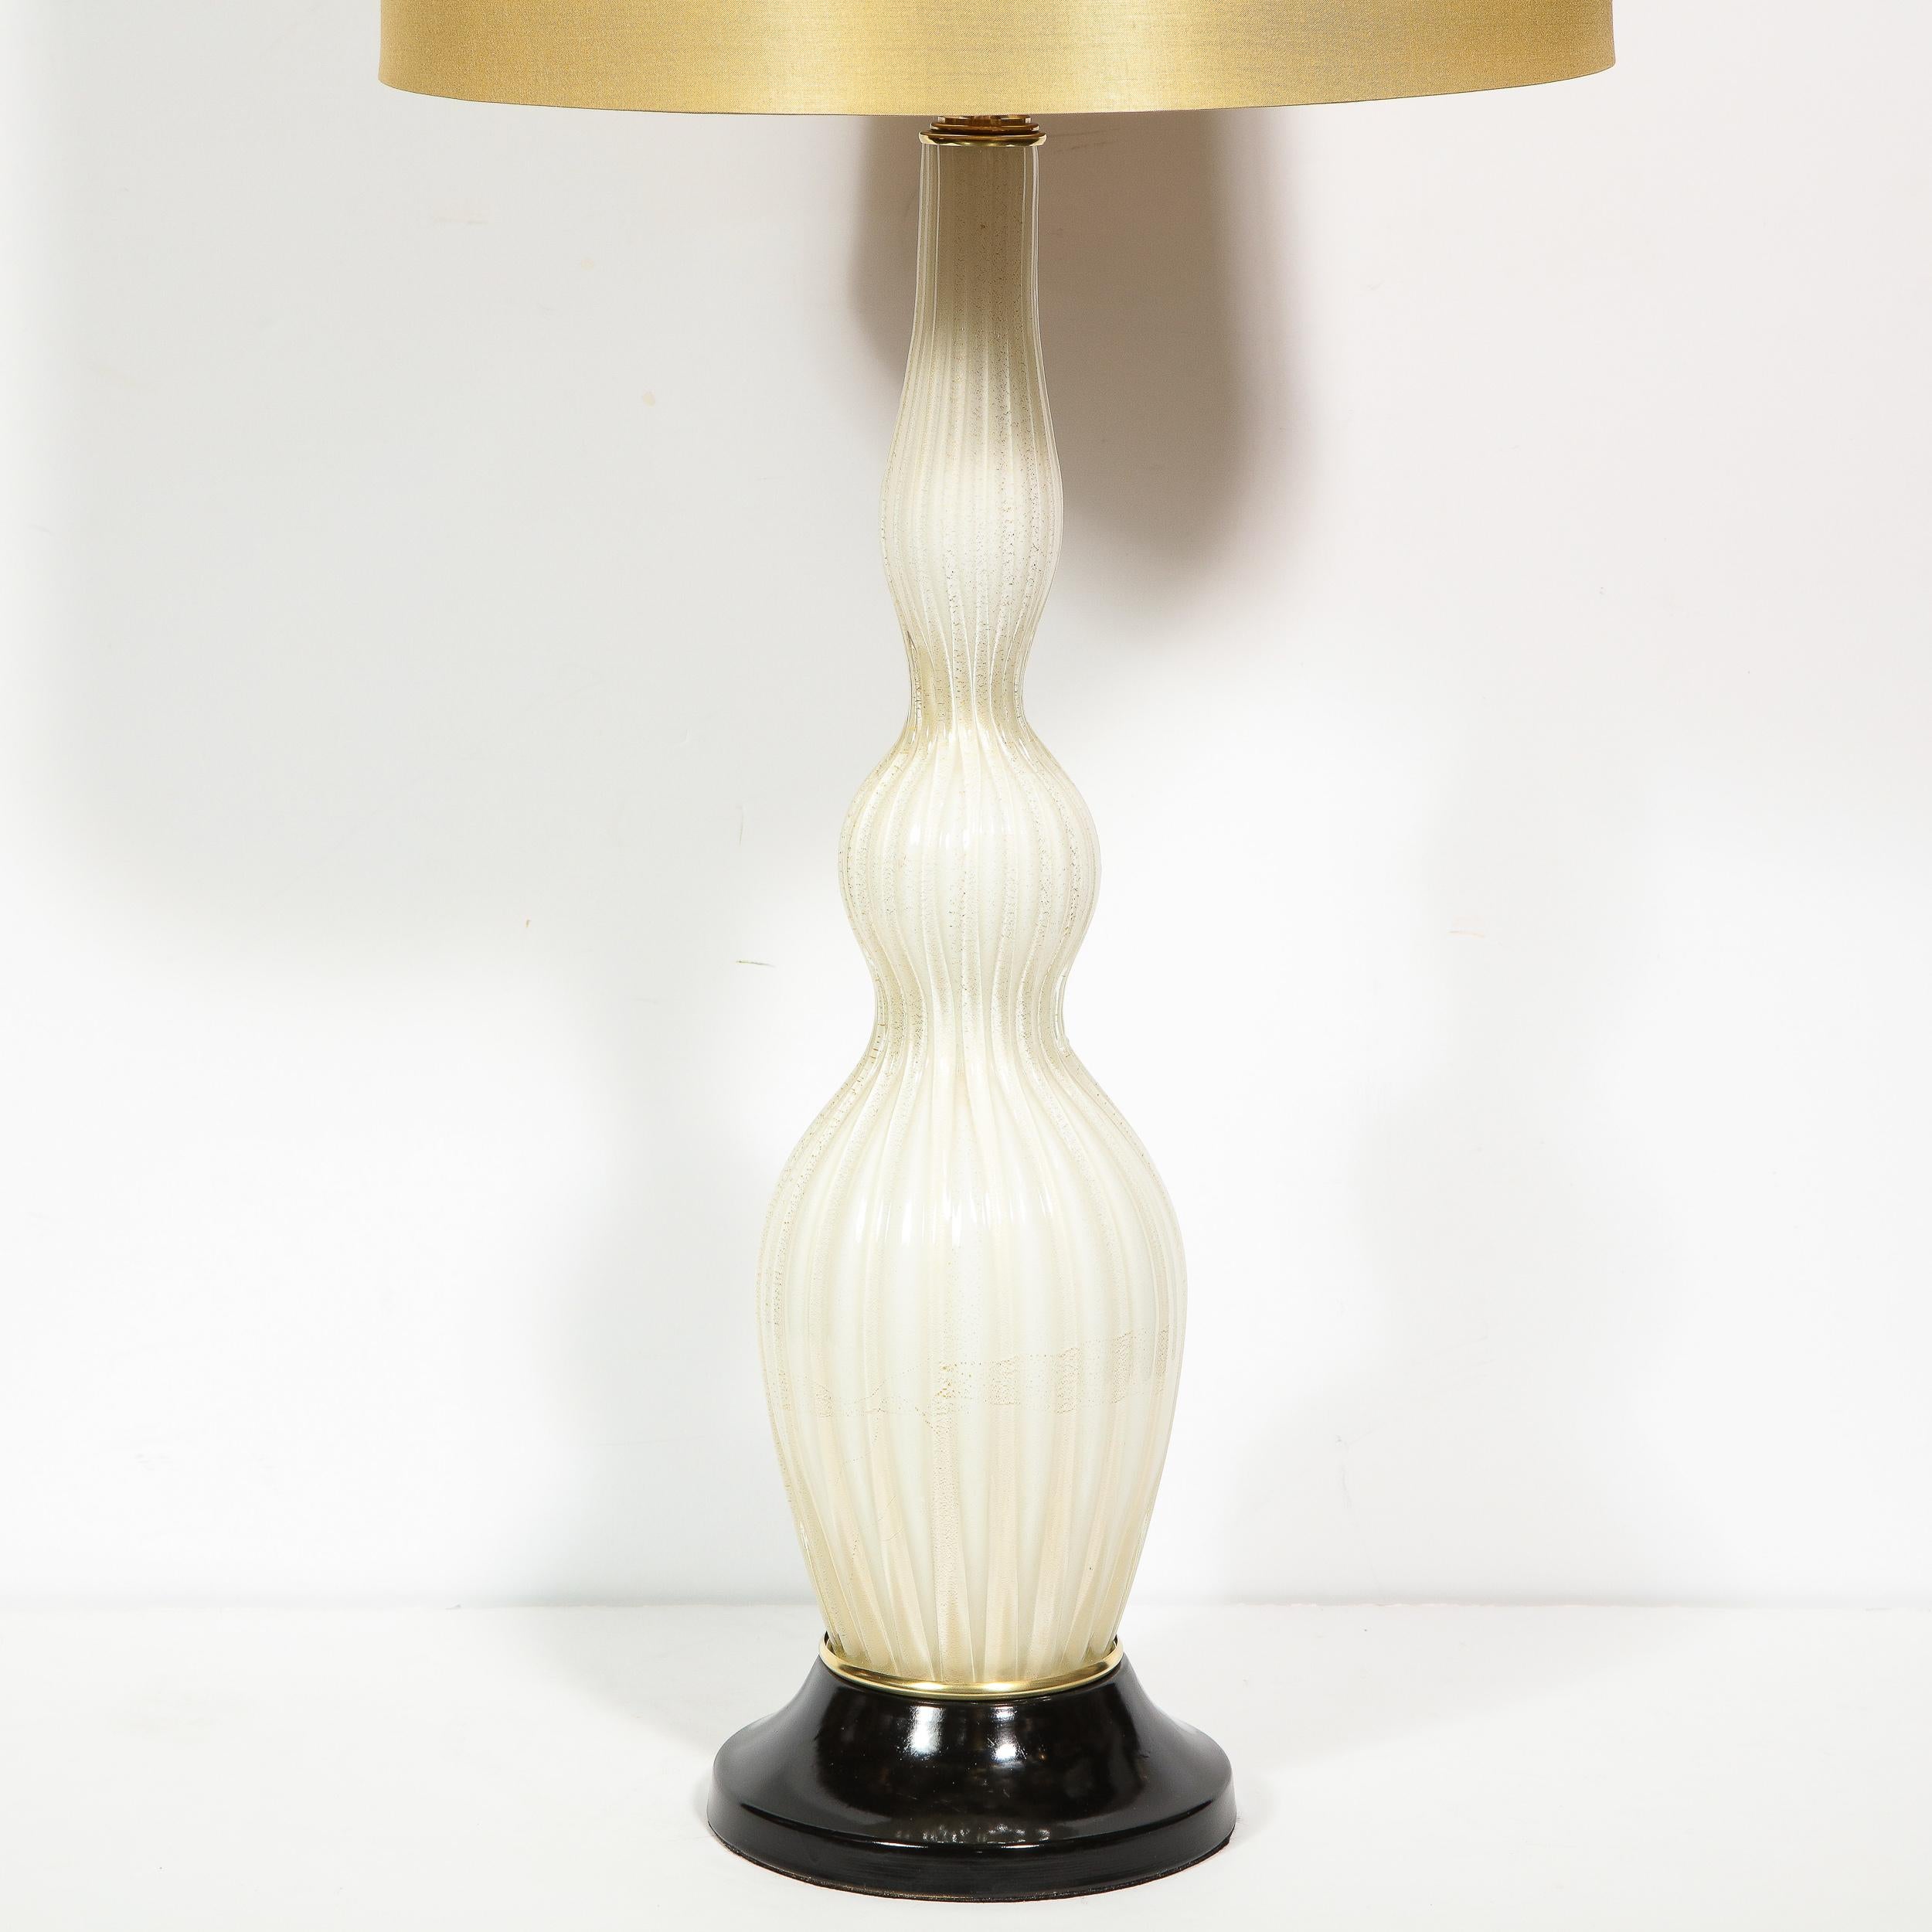 Italian Pair of Mid-Century Modern Channeled White Murano Glass Malmaison Table Lamps